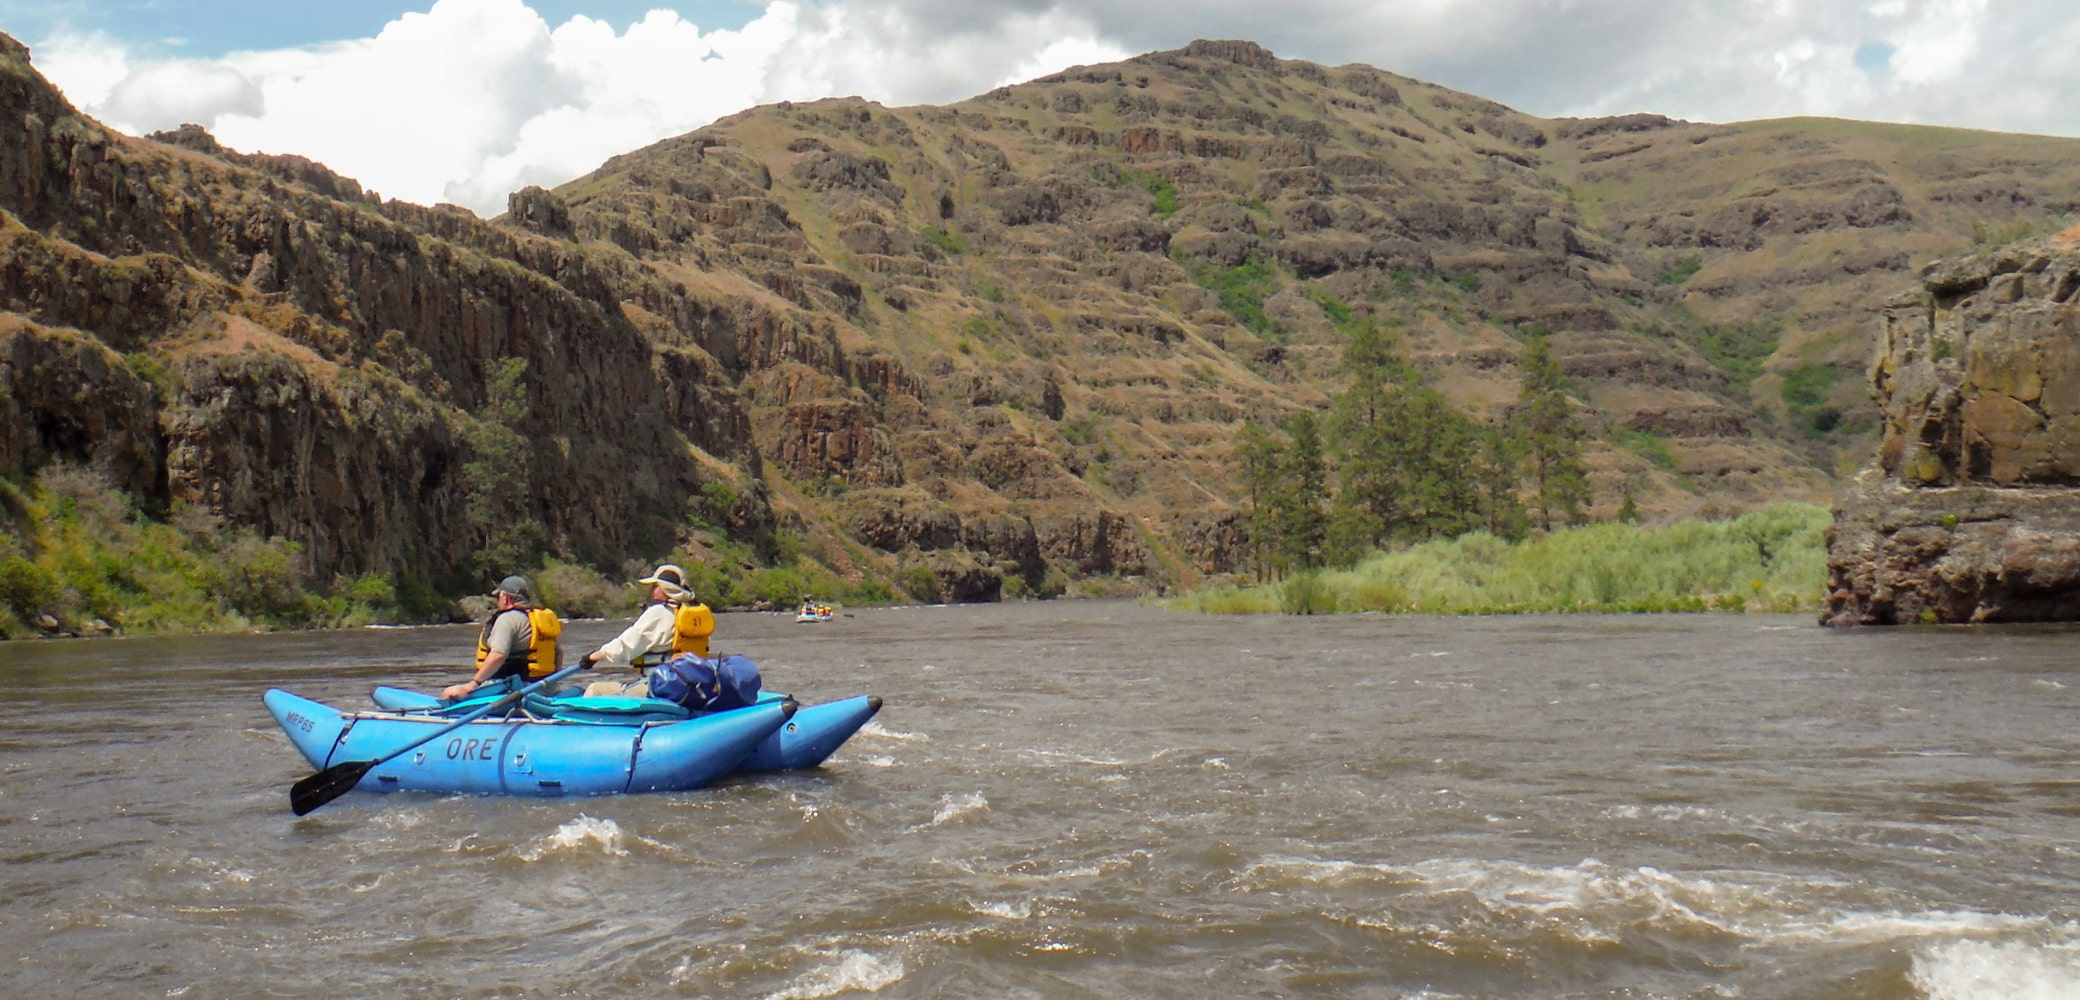 Two people in life vests ride atop a blue cataraft while navigating a calm river in Oregon.